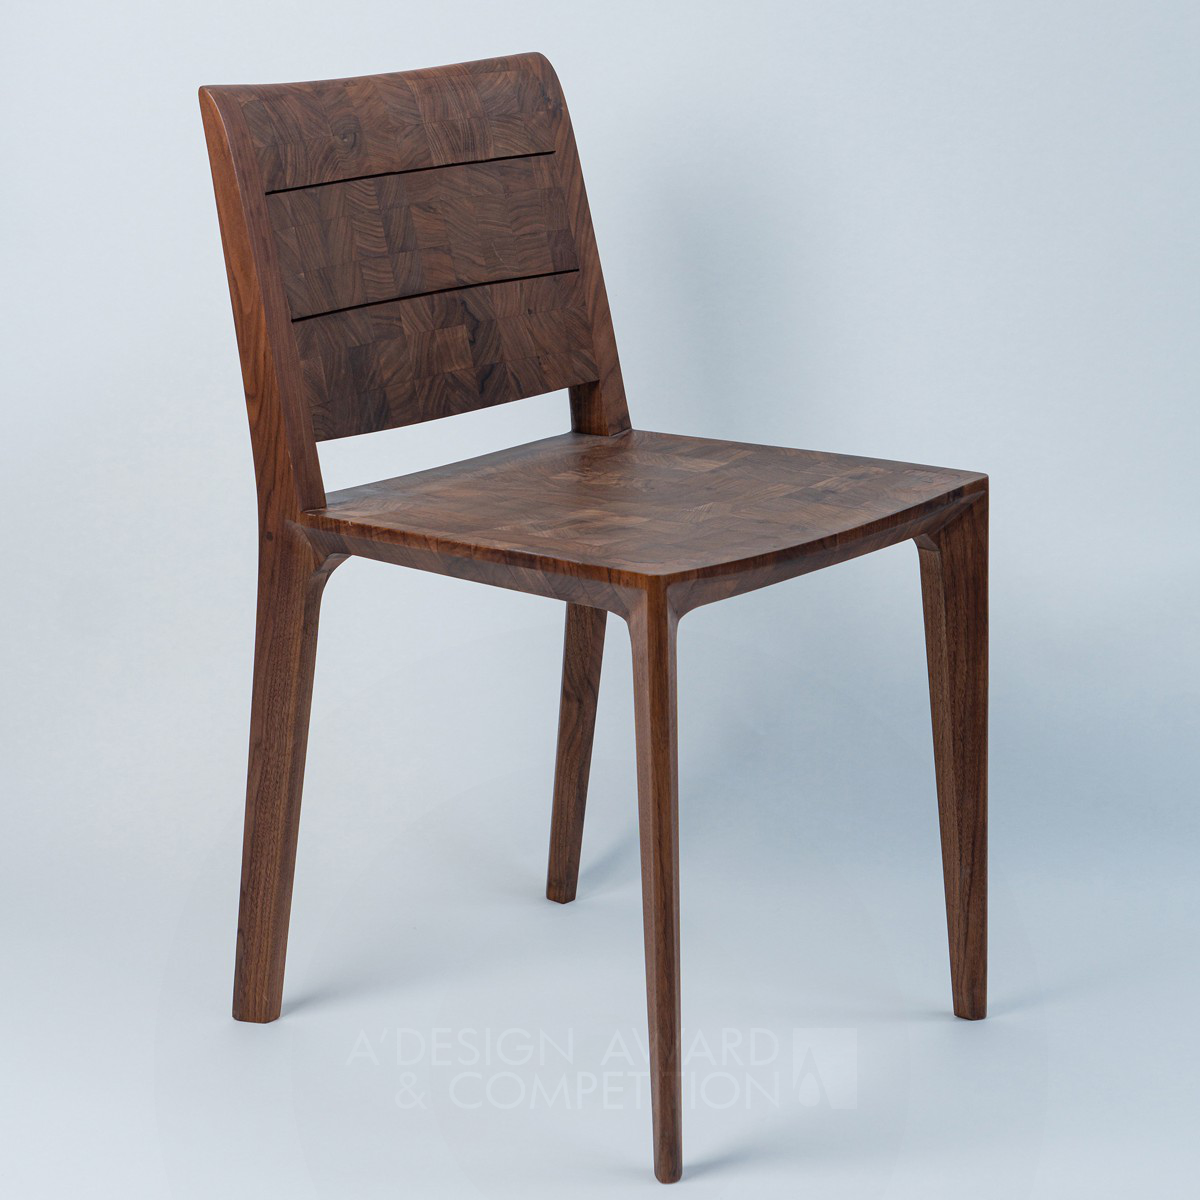 Huile Yi&#039;s Promotion Chair: A Unique End Grain Inspired Dining Chair